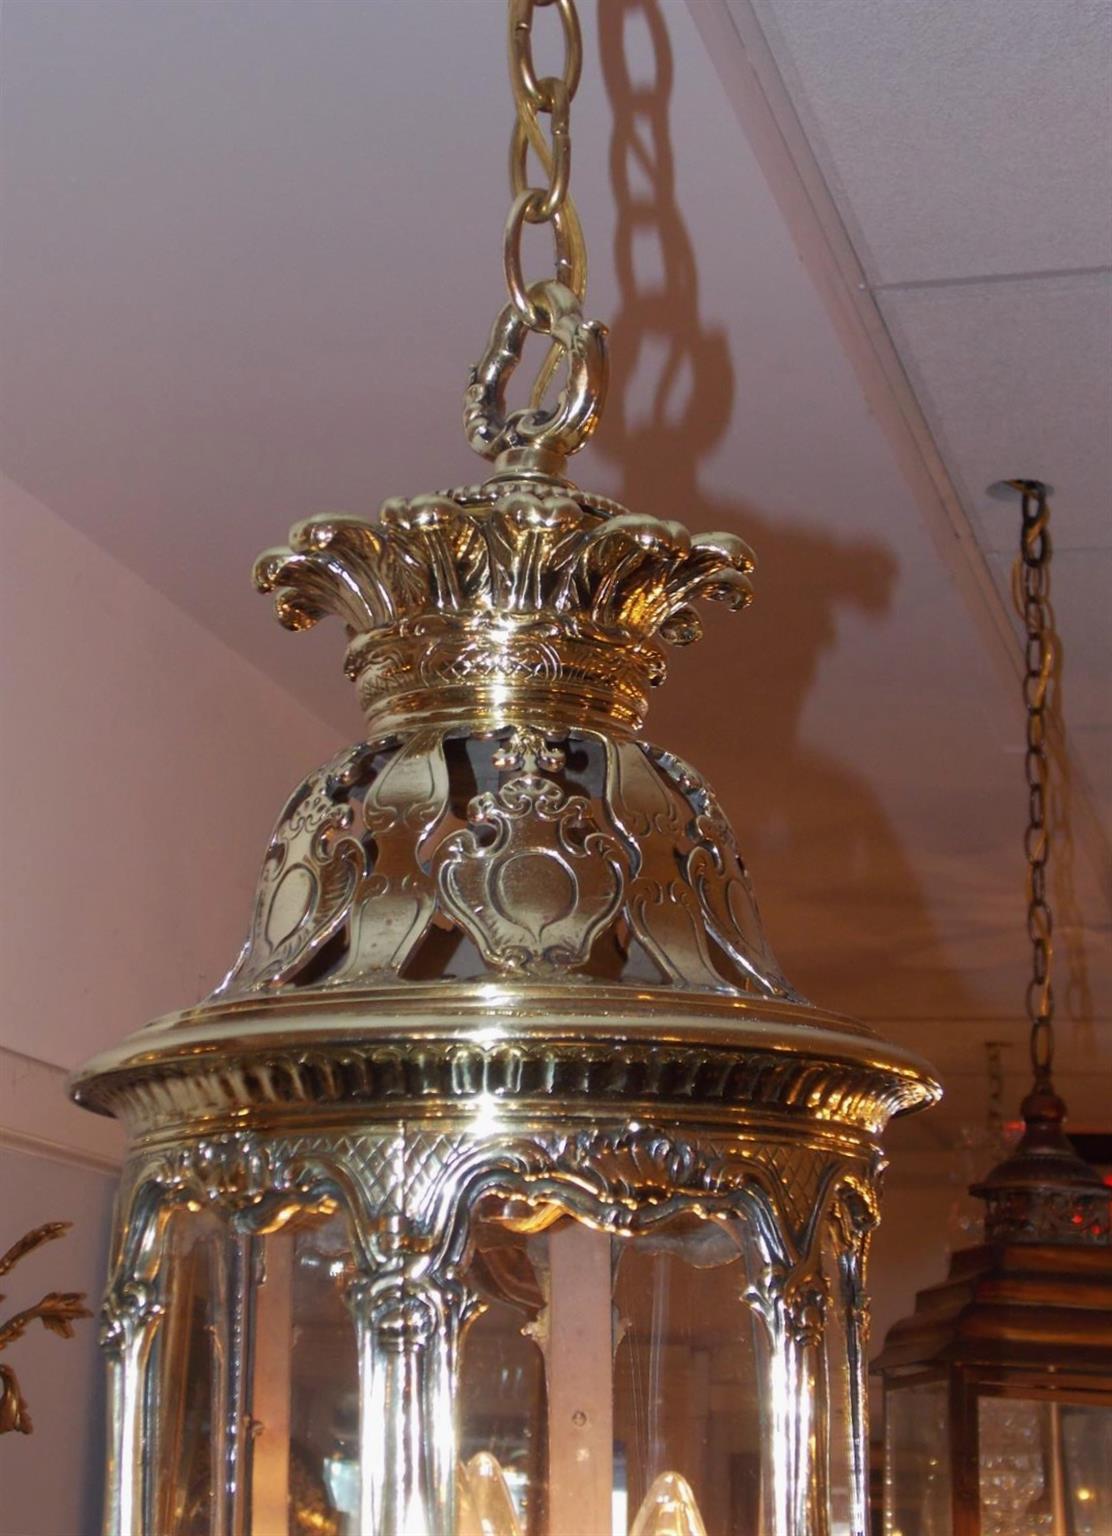 English brass hexagon hanging hall lantern with a decorative centered ring over Prince of Wales plumes, bulbous chased pierced dome with a filigree border, single hinged locking door, interior three light cluster with the original gas piping, and